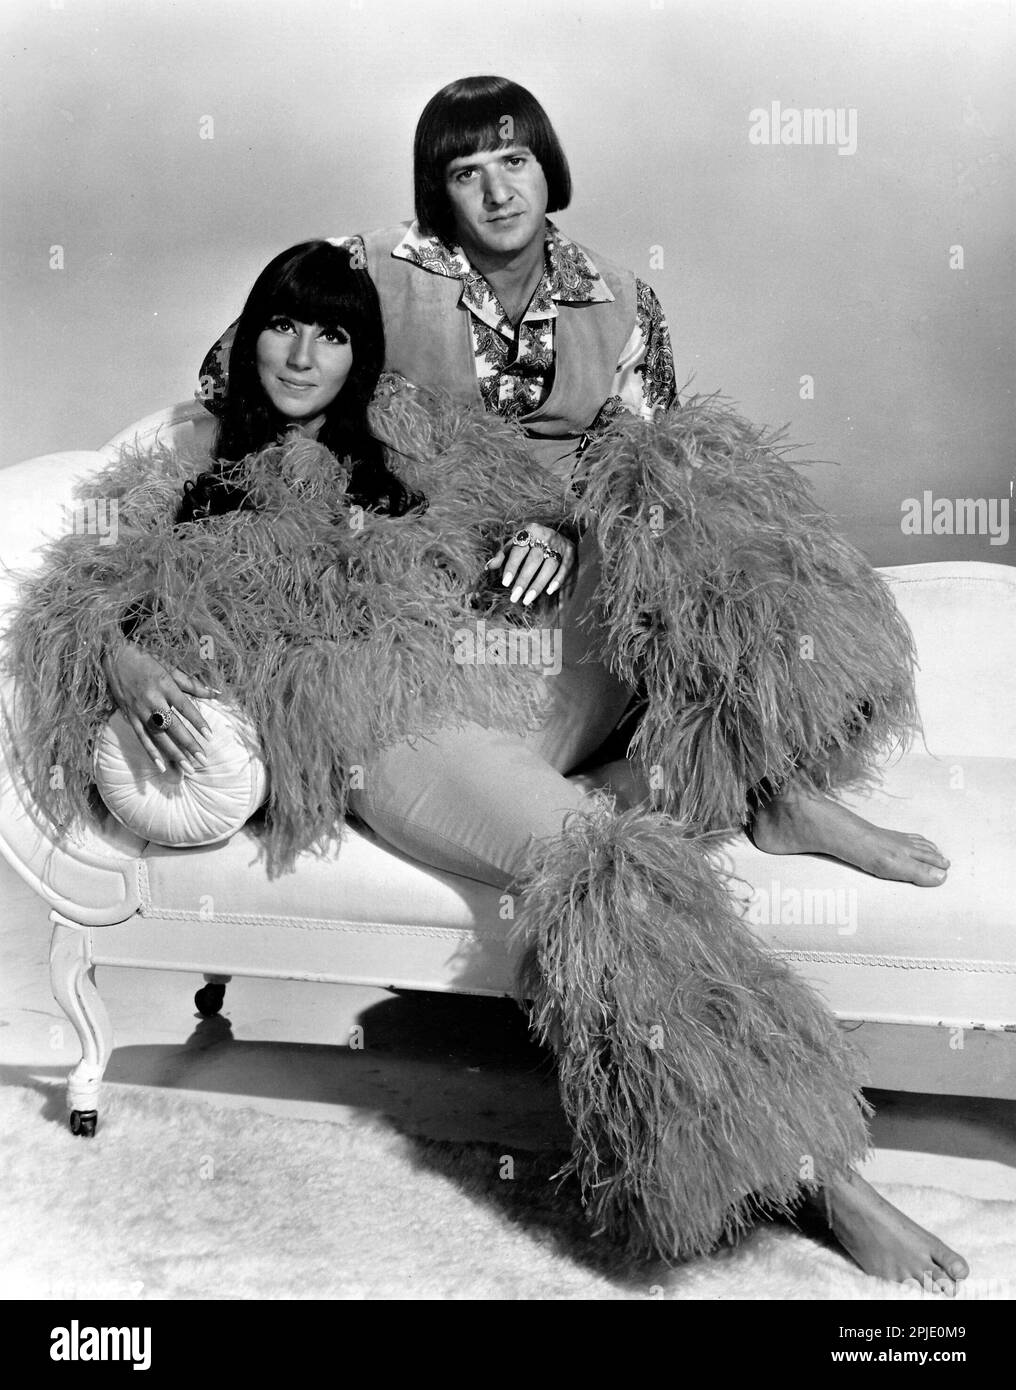 SONNY BONO, CHER and SONNY Y CHER in GOOD TIMES (1967), directed by WILLIAM FRIEDKIN. Credit: American Broadcasting Company (ABC) / Album Stock Photo